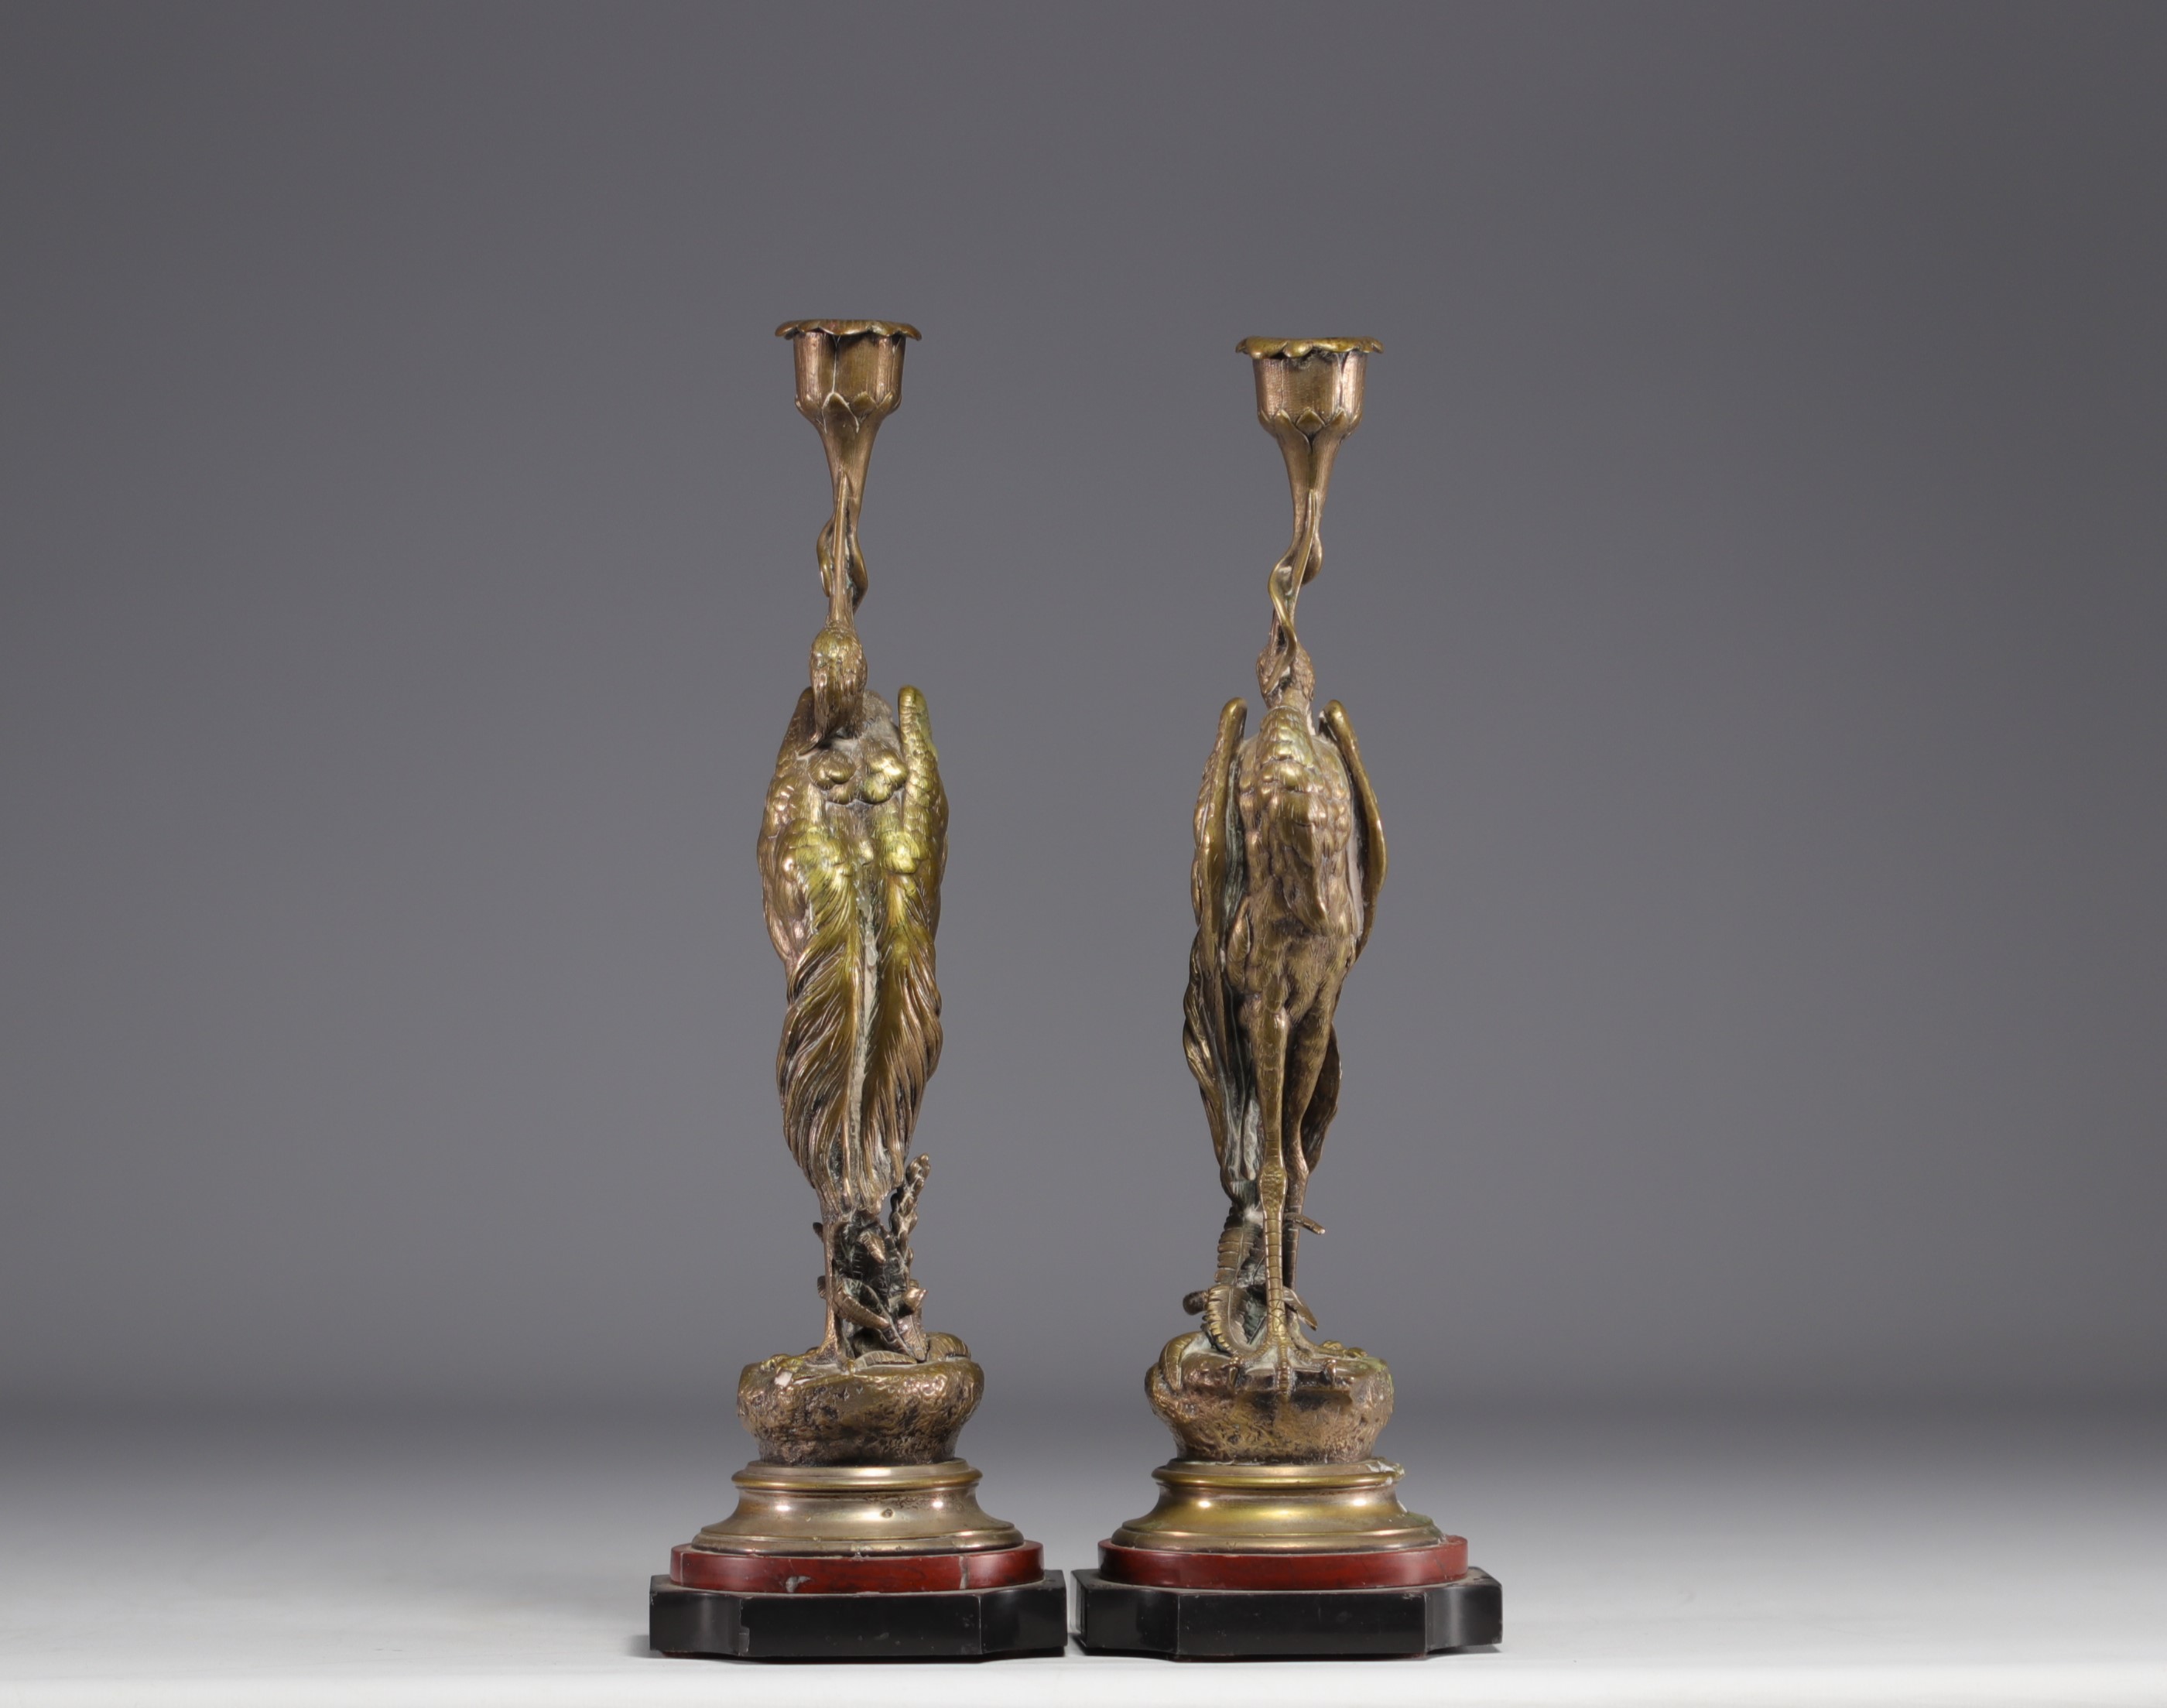 Jules MOIGNIEZ (1835-1894) "Les echassiers" Pair of bronze candlesticks. - Image 4 of 5